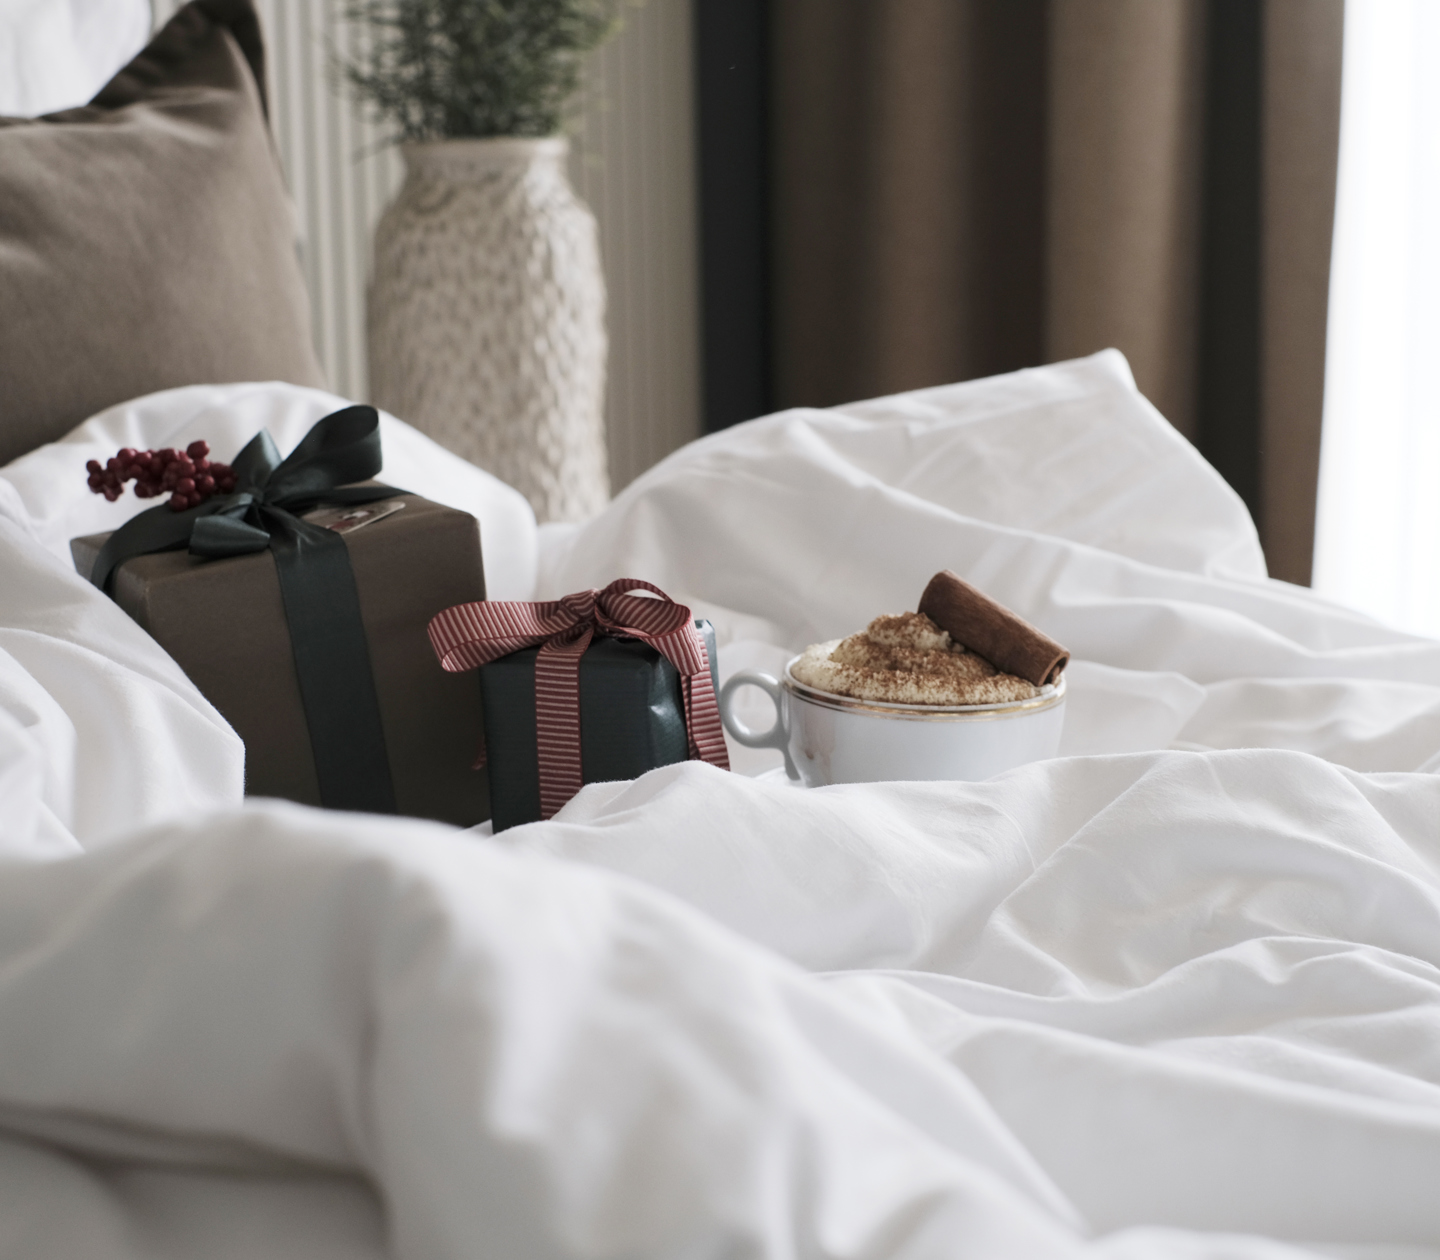 Christmas gifts and coffee cup on hotel bed